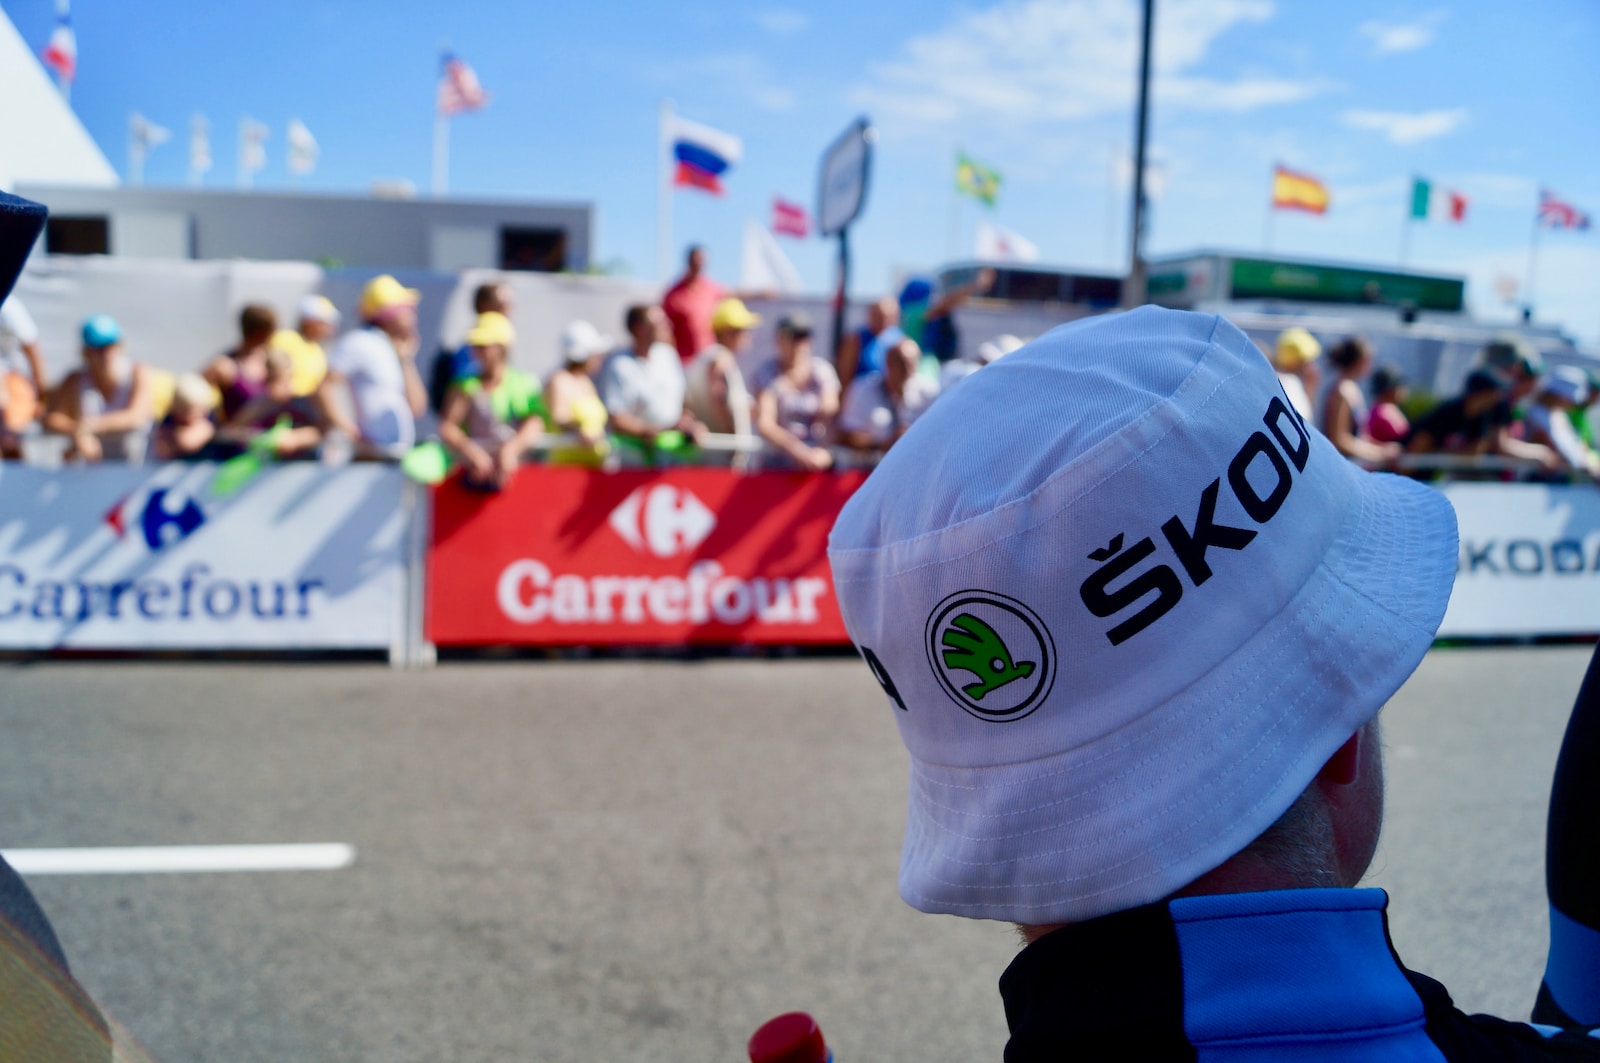 man wearing white hat with carrefour banner